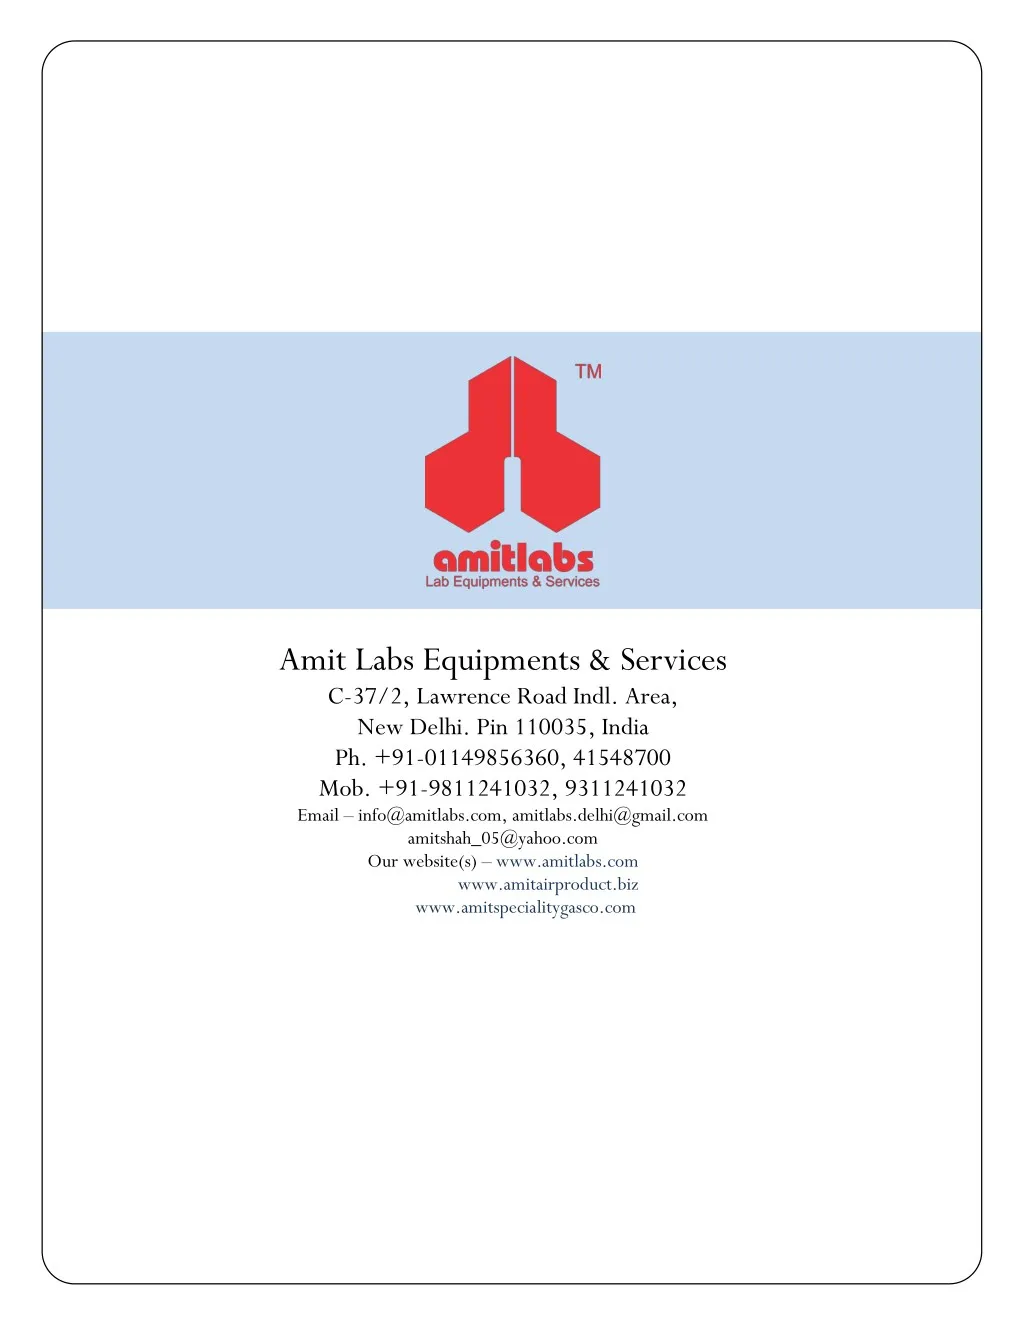 amit labs equipments services c 37 2 lawrence